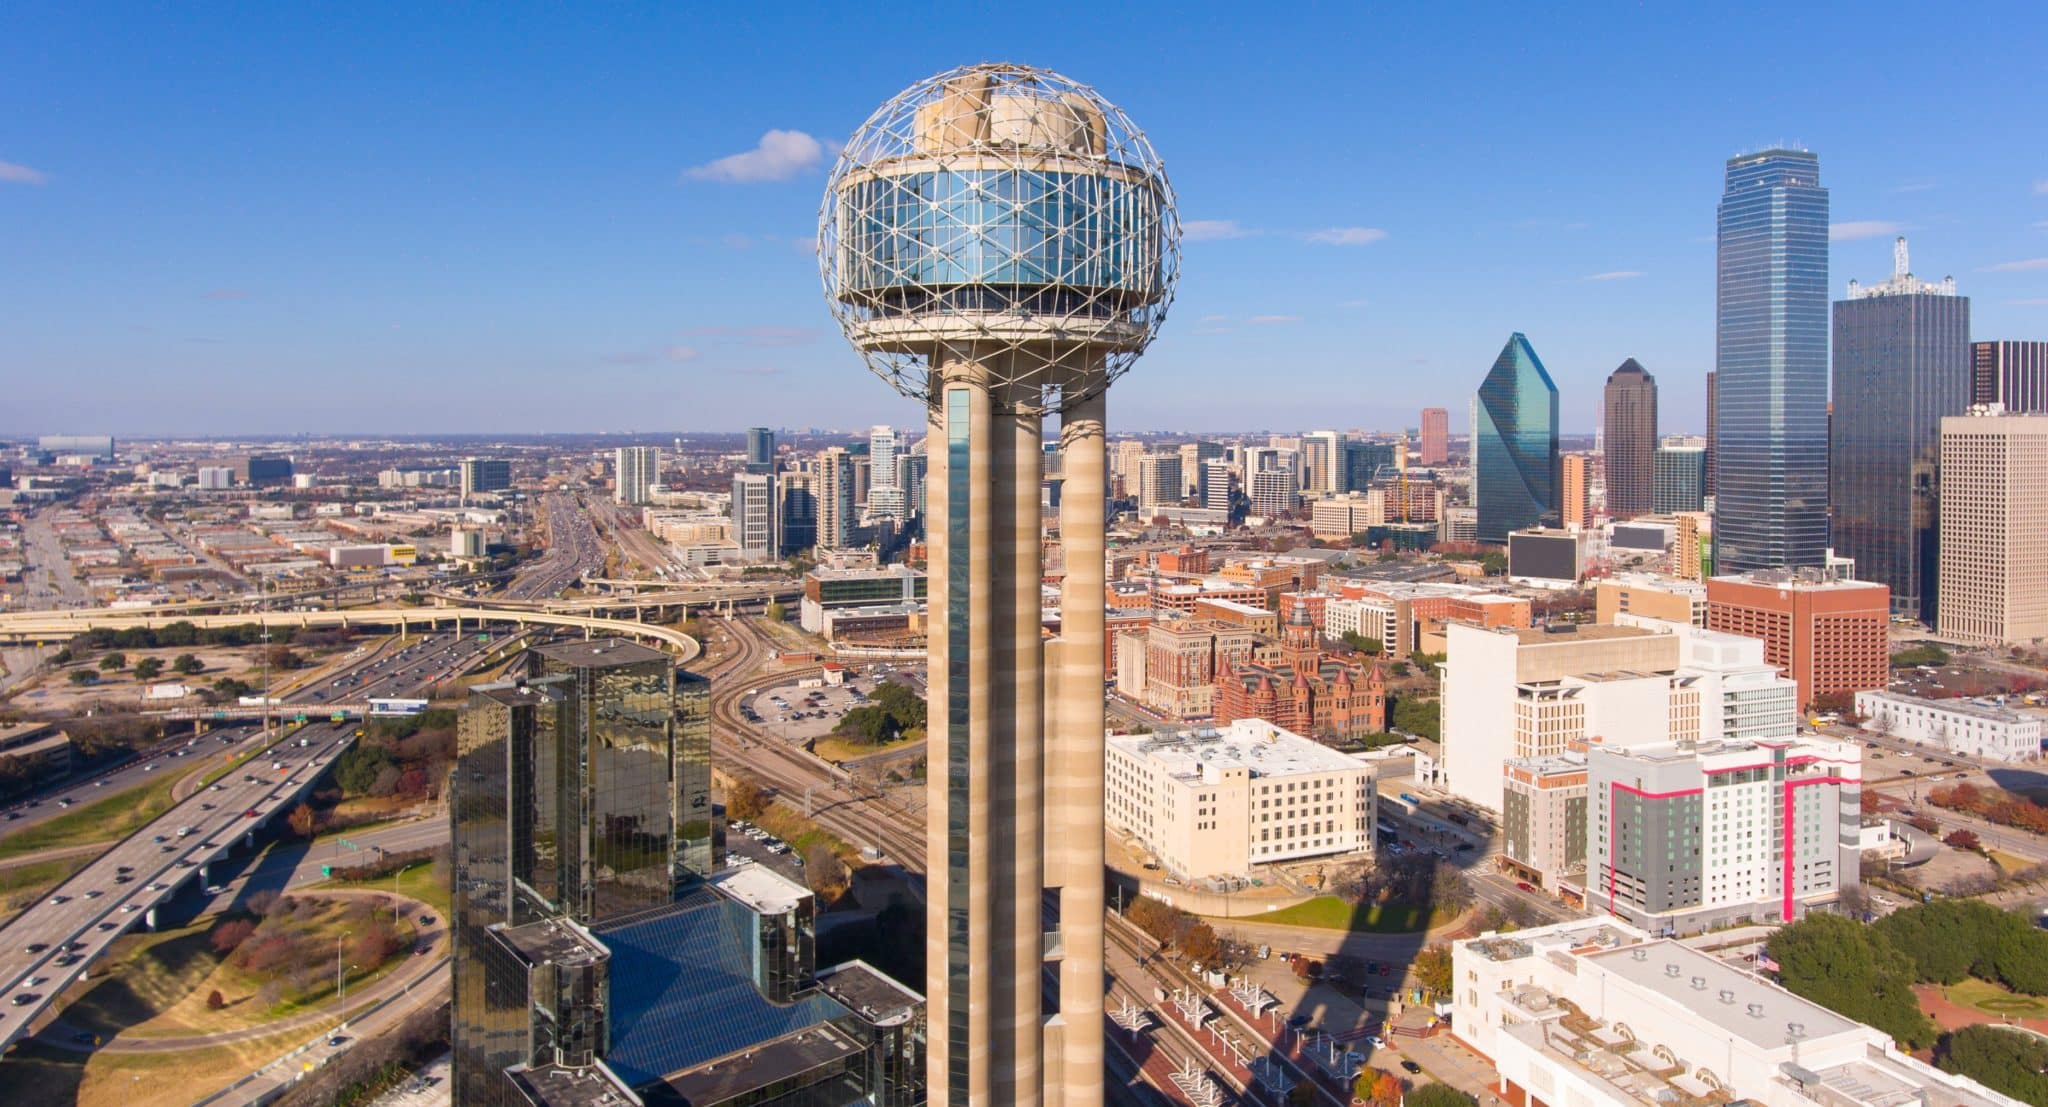 Dallas' Reunion Tower Is Getting a New Restaurant - D Magazine